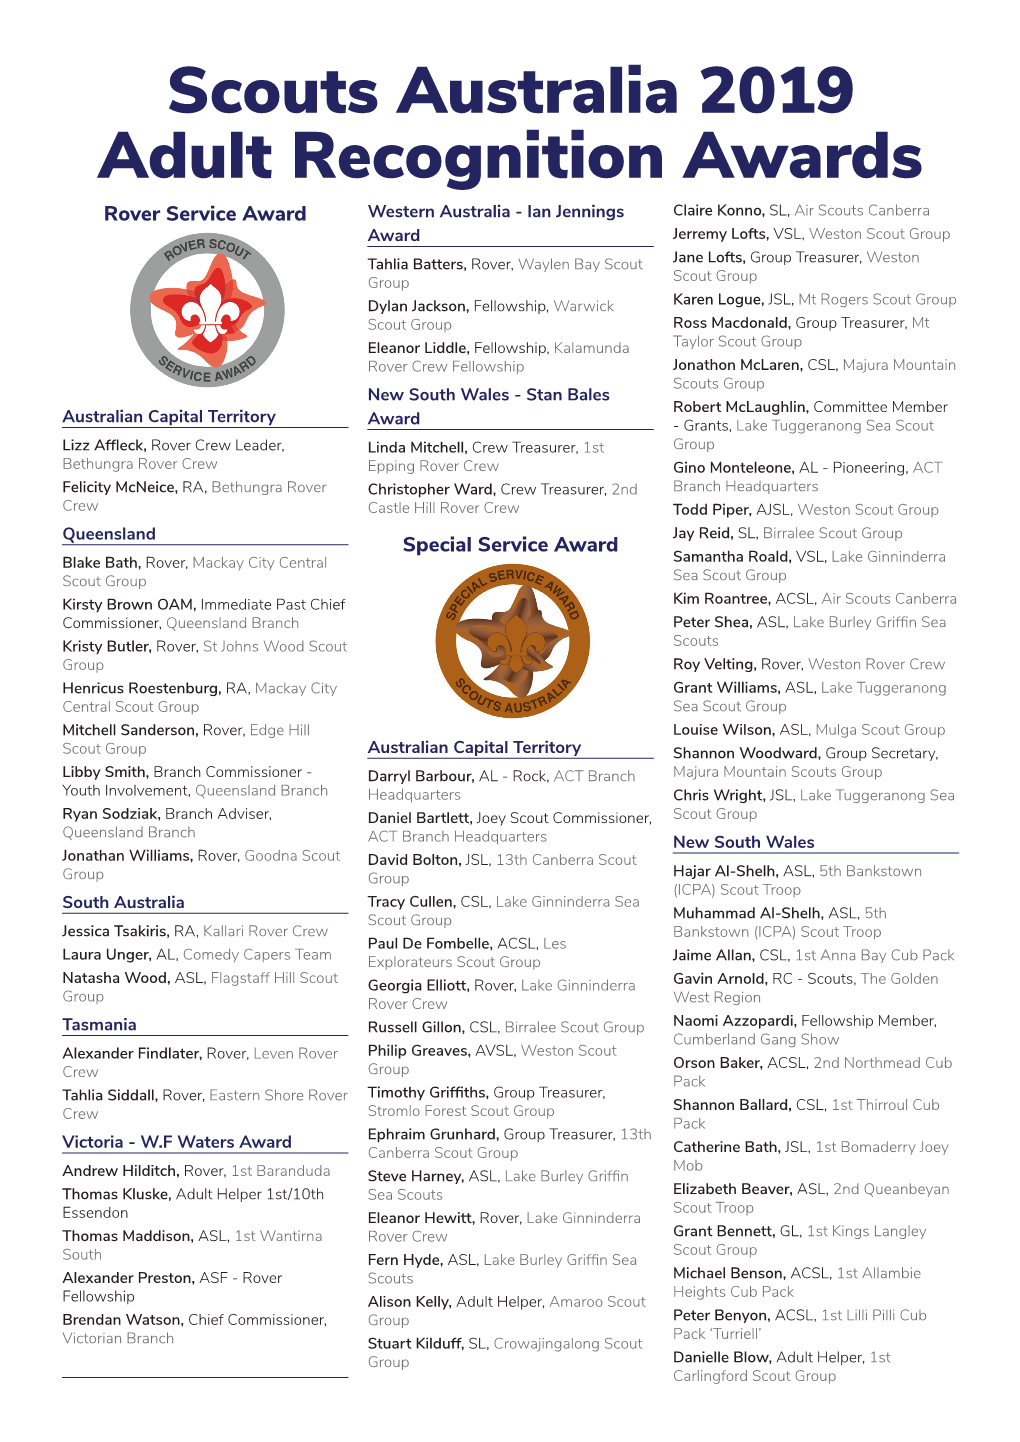 Scouts Australia 2019 Adult Recognition Awards